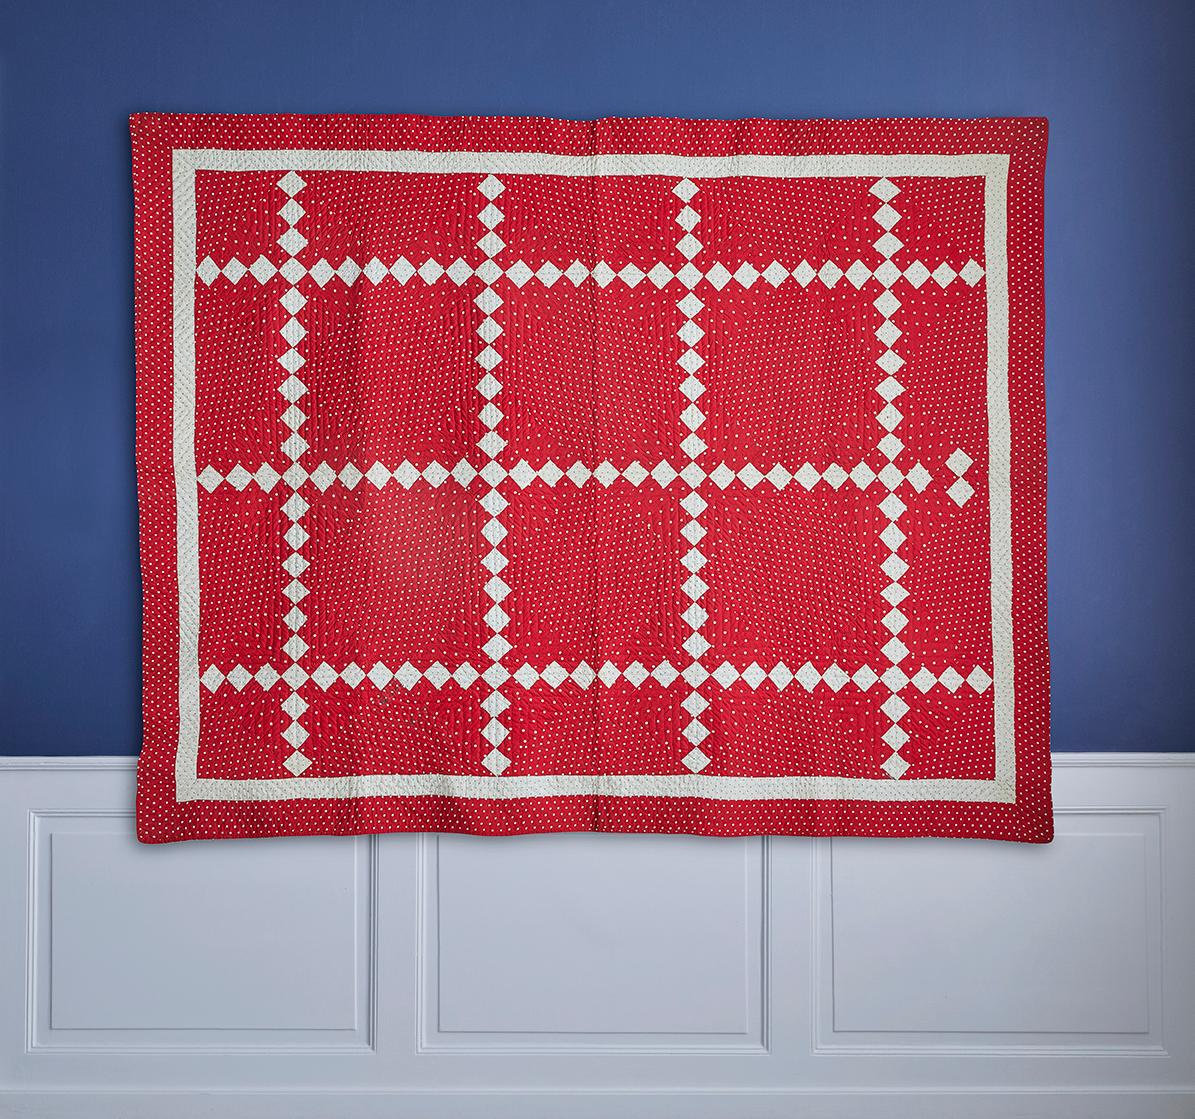 USA, 1890s

Antique Irish red and white chain nine patch quilt. Hand pieced and hand quilted in different dot fabrics. 

Measures: H 240 x W 186 cm.
 